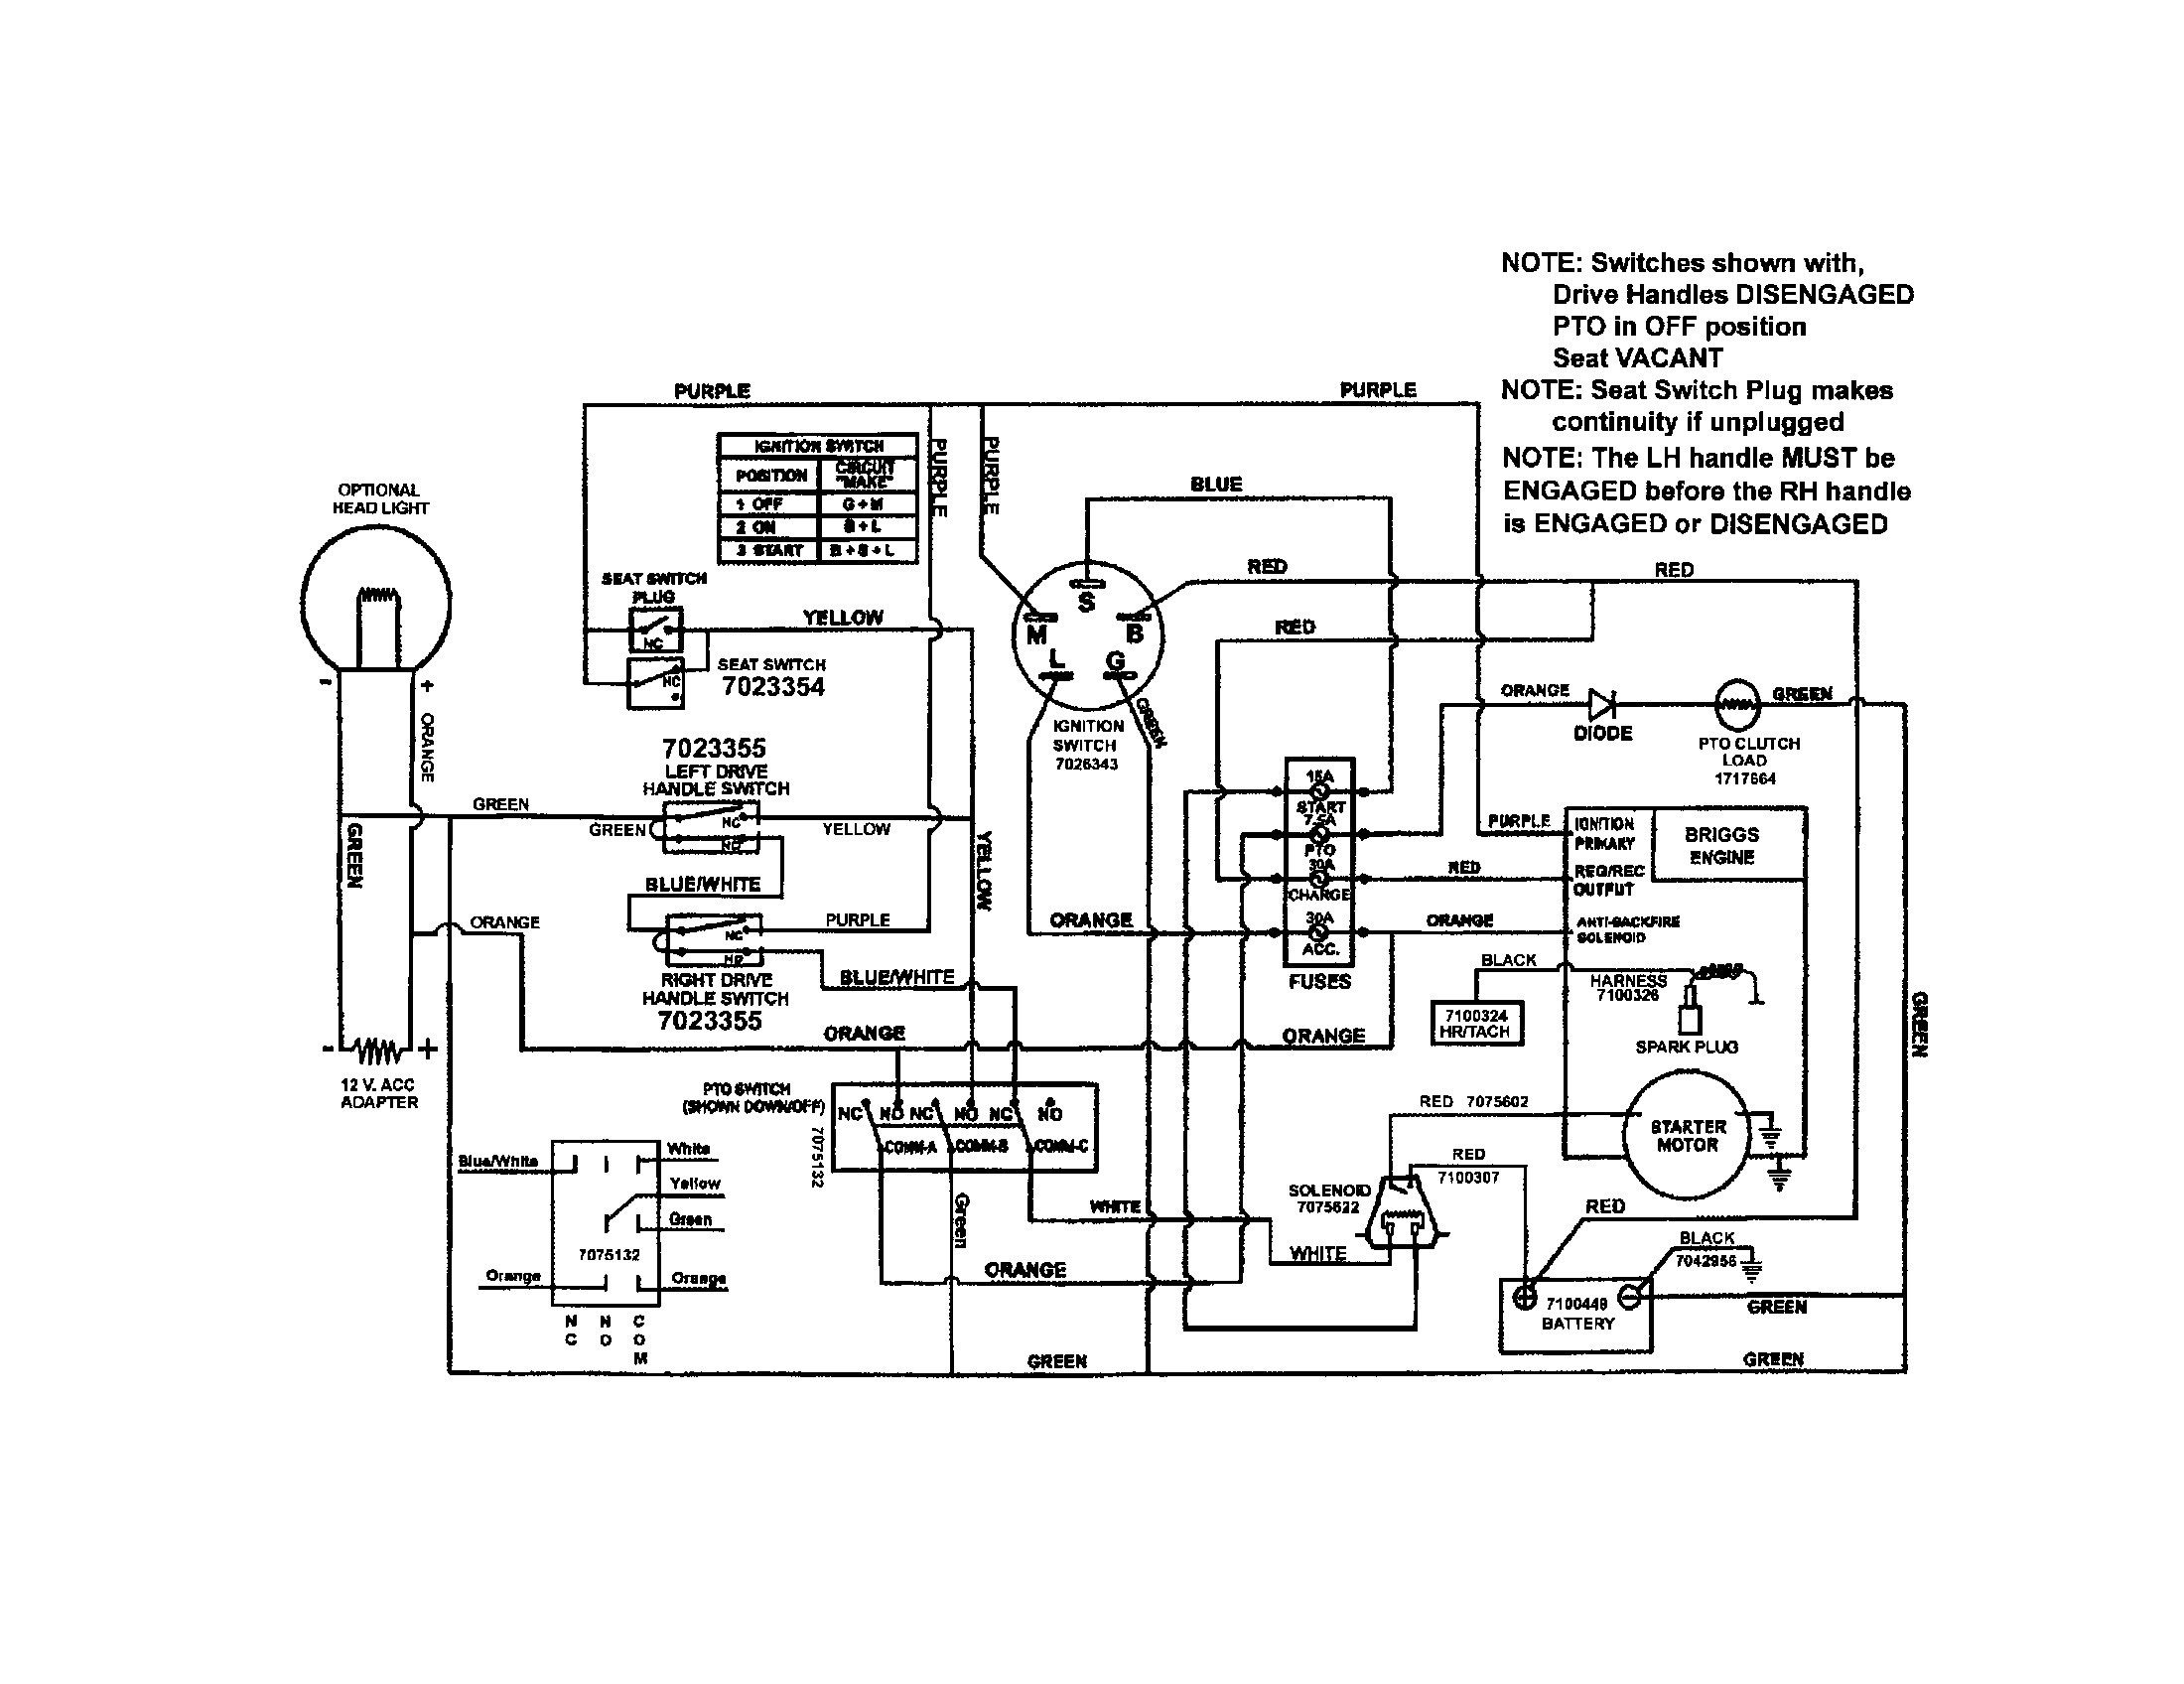 Briggs and Stratton 18 Hp Twin Wiring Diagram solutions 17 5 Briggs and Stratton Ignition